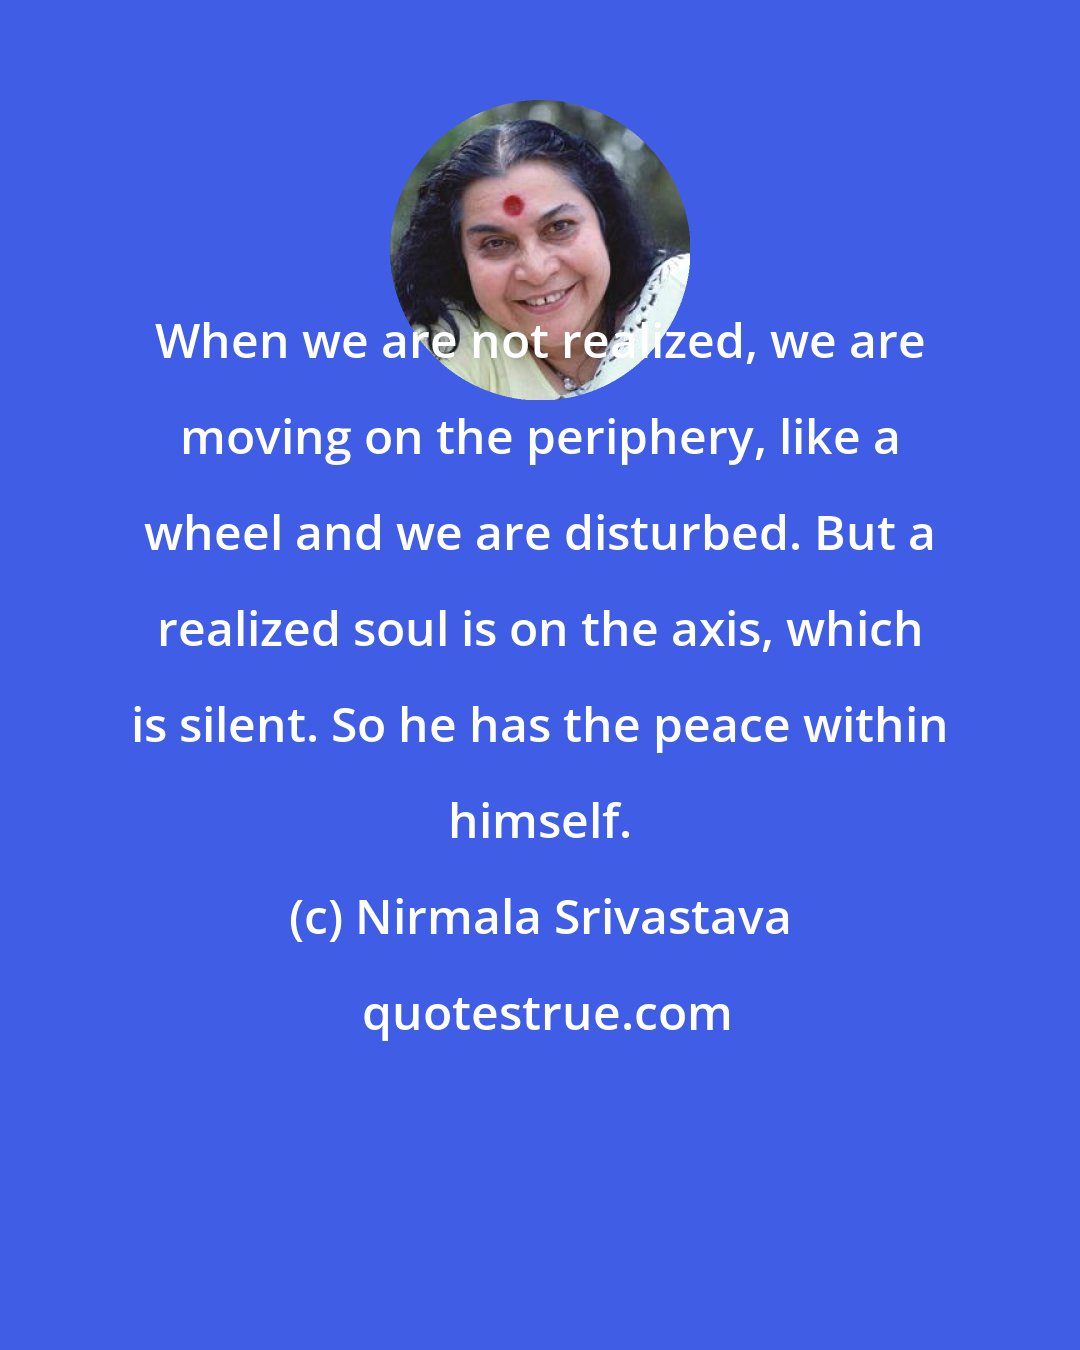 Nirmala Srivastava: When we are not realized, we are moving on the periphery, like a wheel and we are disturbed. But a realized soul is on the axis, which is silent. So he has the peace within himself.